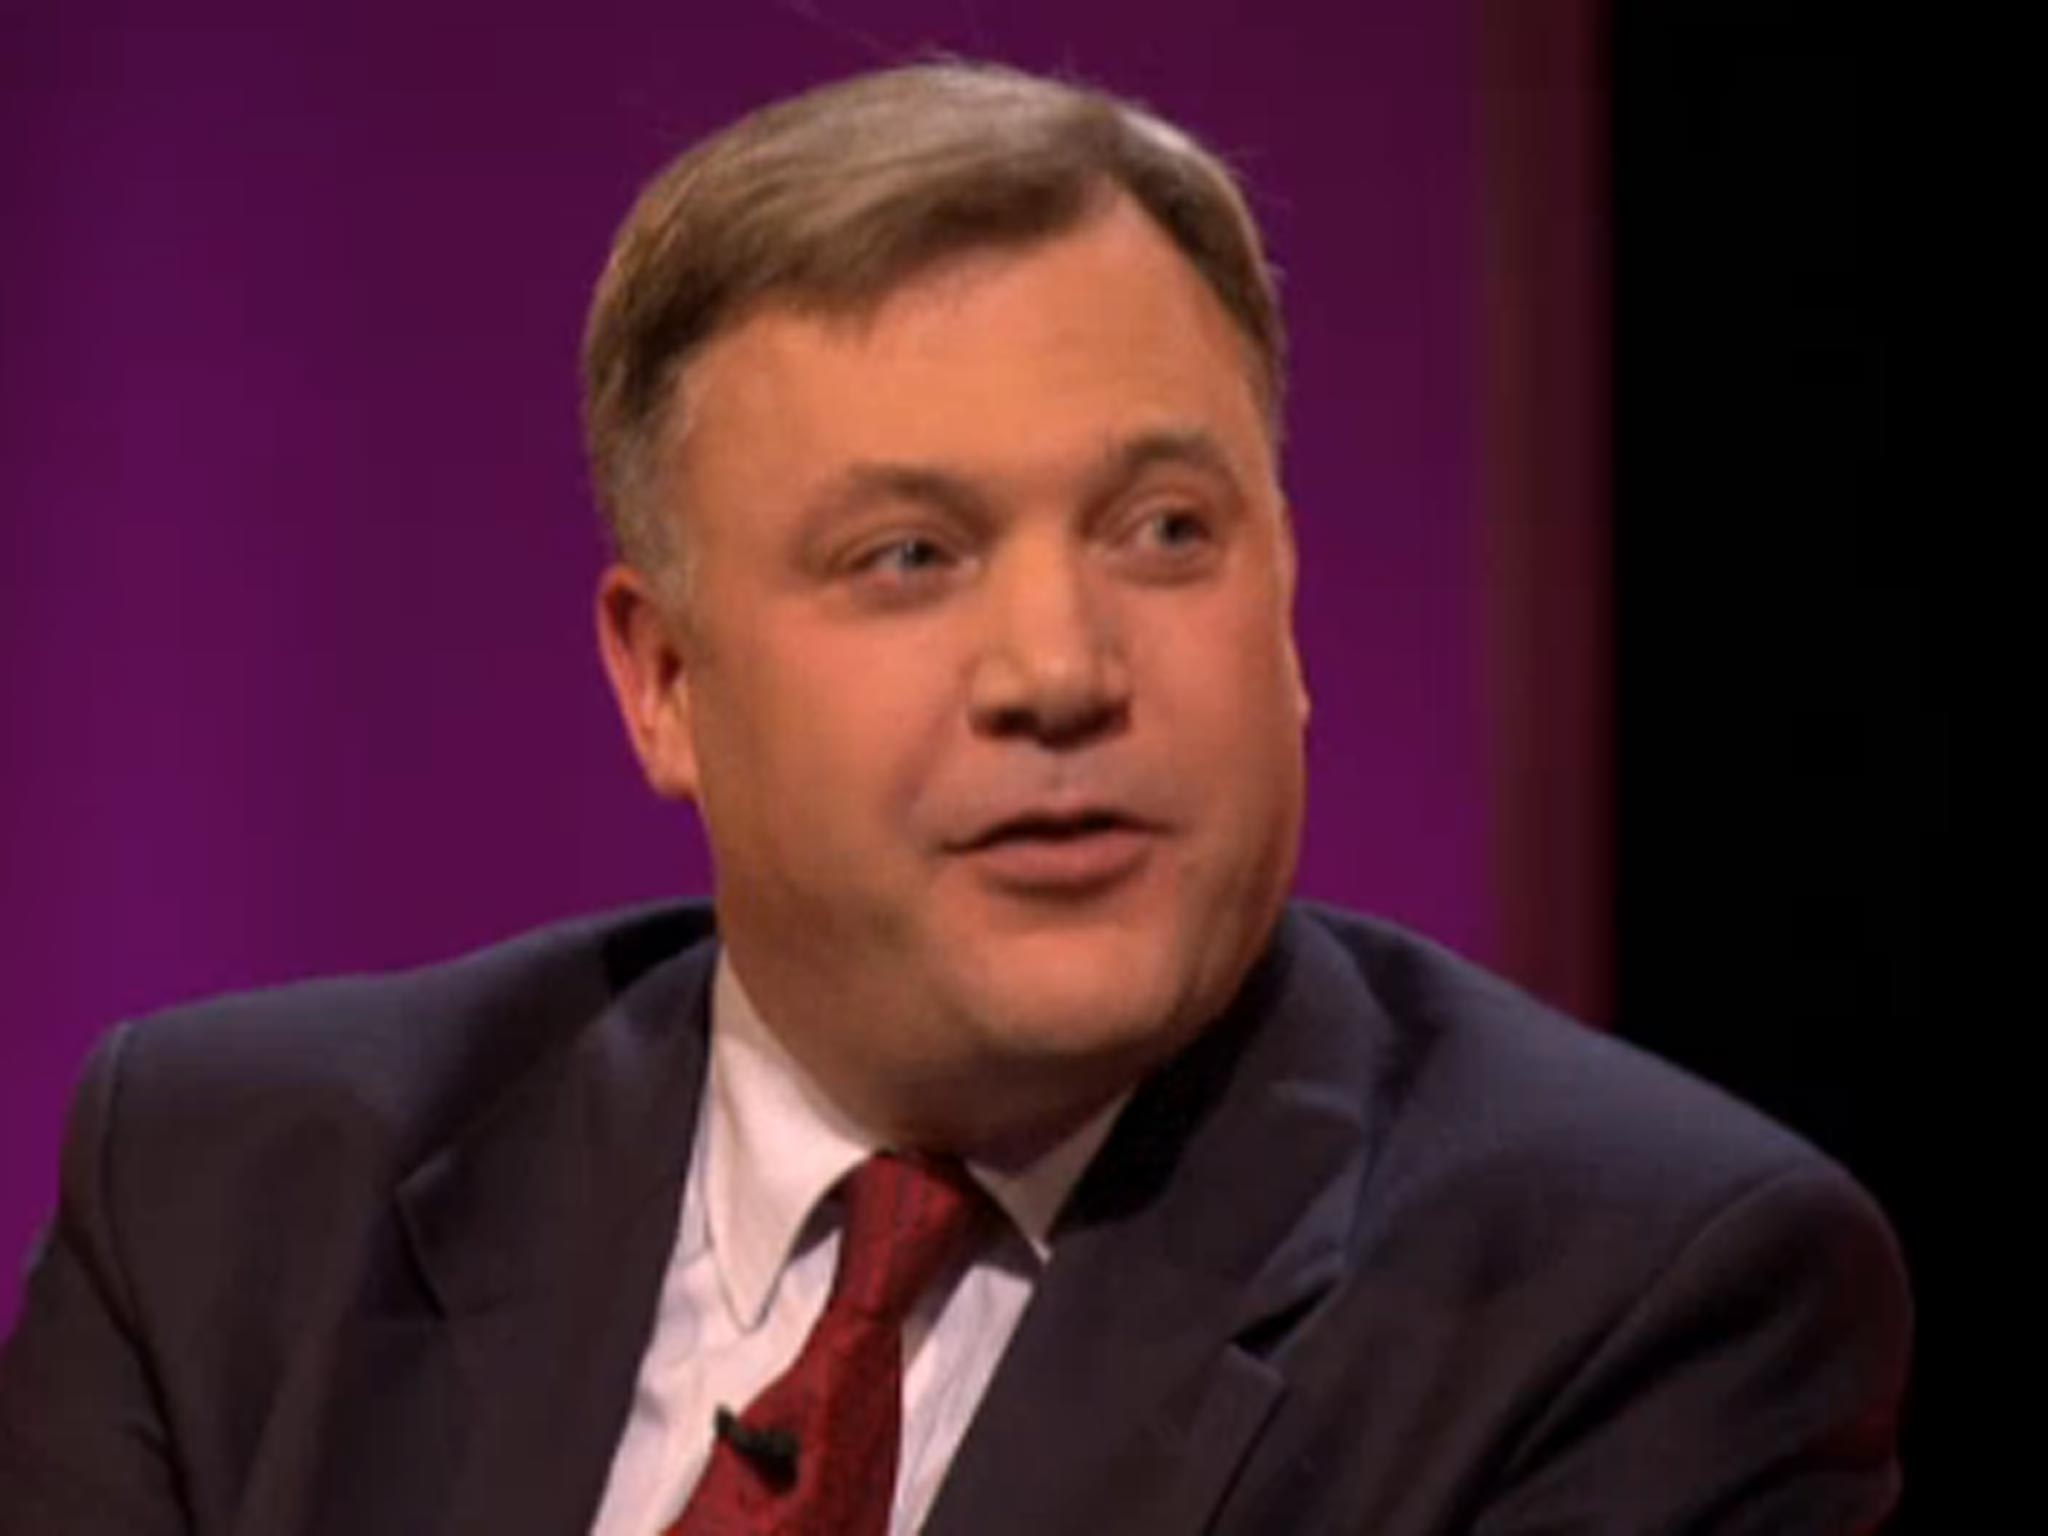 Ed Balls on ITV's The Agenda said he couldn't remember ever going to the pub with Ed Miliband